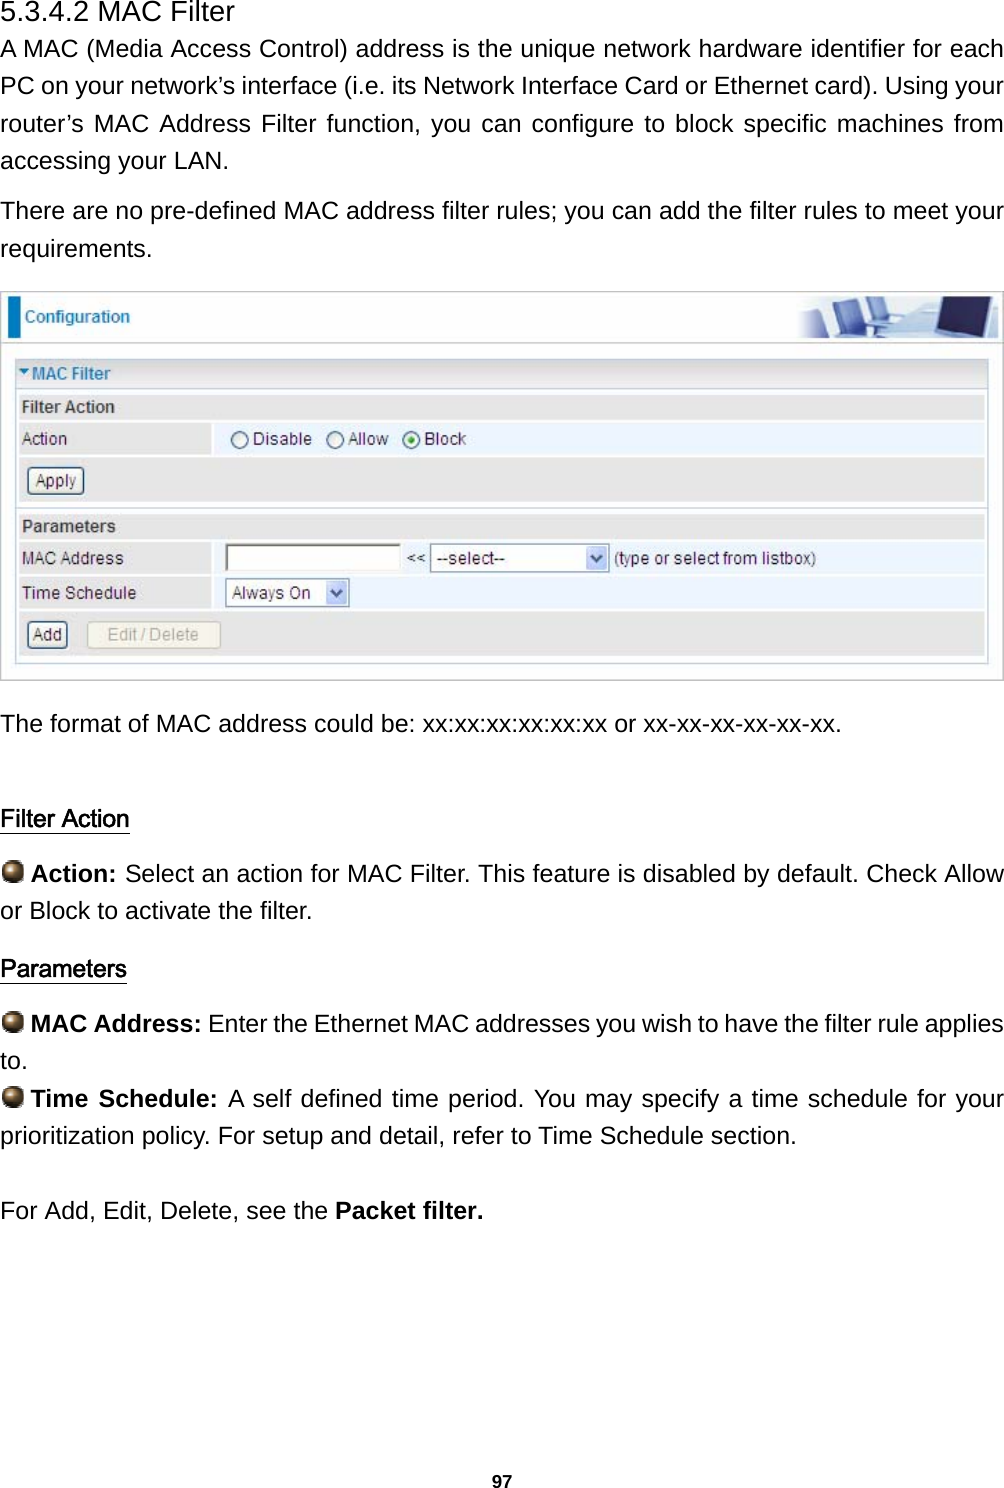 97 5.3.4.2 MAC Filter A MAC (Media Access Control) address is the unique network hardware identifier for each PC on your network’s interface (i.e. its Network Interface Card or Ethernet card). Using your router’s MAC Address Filter function, you can configure to block specific machines from accessing your LAN. There are no pre-defined MAC address filter rules; you can add the filter rules to meet your requirements.   The format of MAC address could be: xx:xx:xx:xx:xx:xx or xx-xx-xx-xx-xx-xx.  Filter Action  Action: Select an action for MAC Filter. This feature is disabled by default. Check Allow or Block to activate the filter. Parameters  MAC Address: Enter the Ethernet MAC addresses you wish to have the filter rule applies to.  Time Schedule: A self defined time period. You may specify a time schedule for your prioritization policy. For setup and detail, refer to Time Schedule section.  For Add, Edit, Delete, see the Packet filter.  